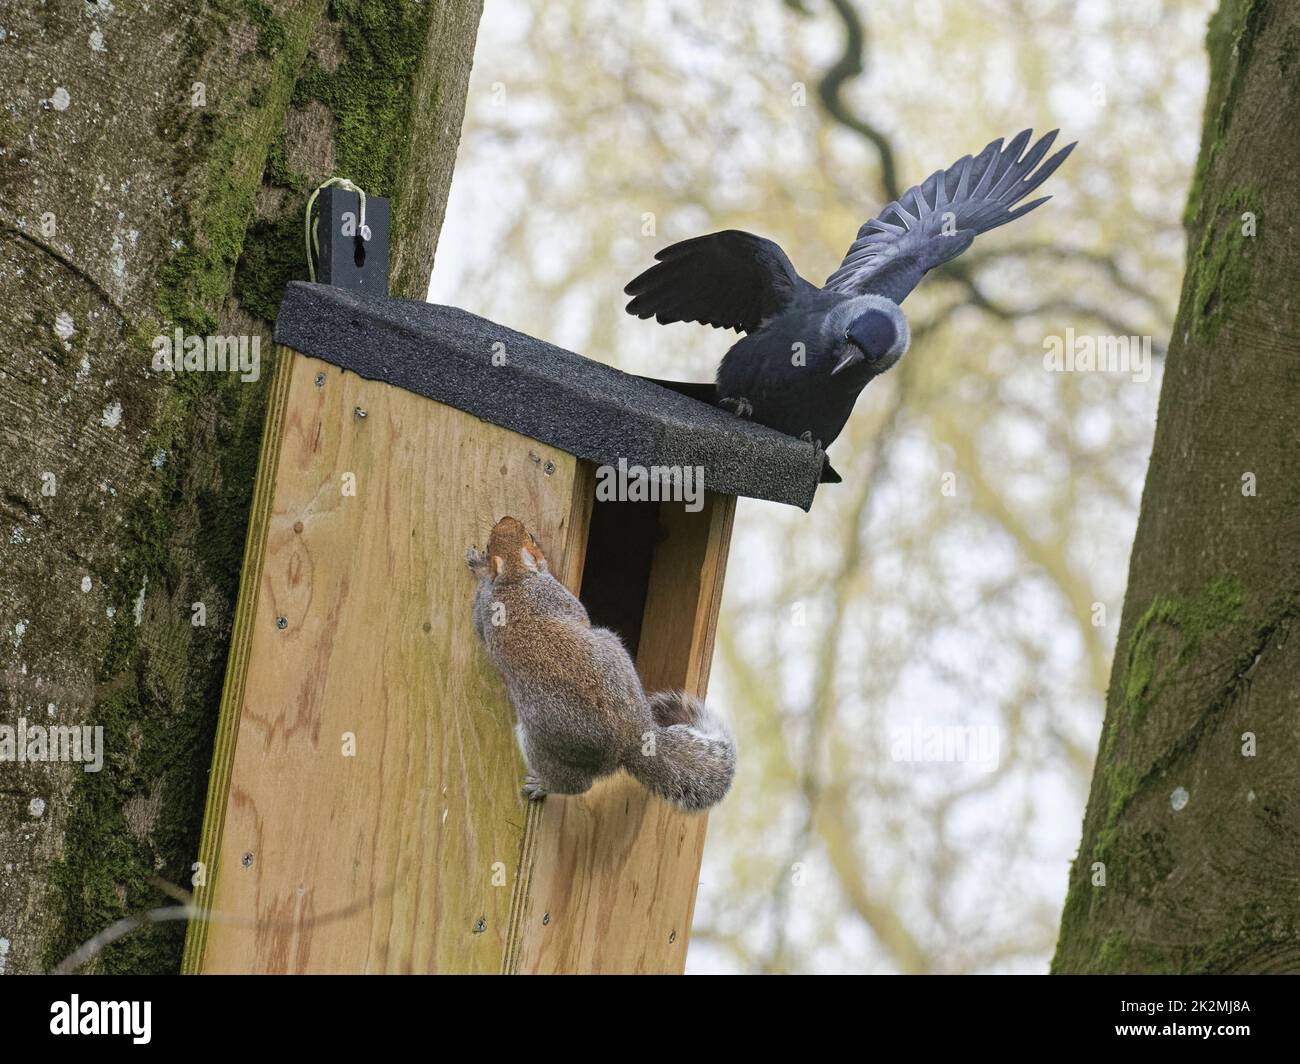 Jackdaw (Corvus monedula) chasing a Grey squirrel (Sciurus carolinensis) as it emerges from a nest box the bird wants to nest in, Wiltshire, UK, March. Stock Photo